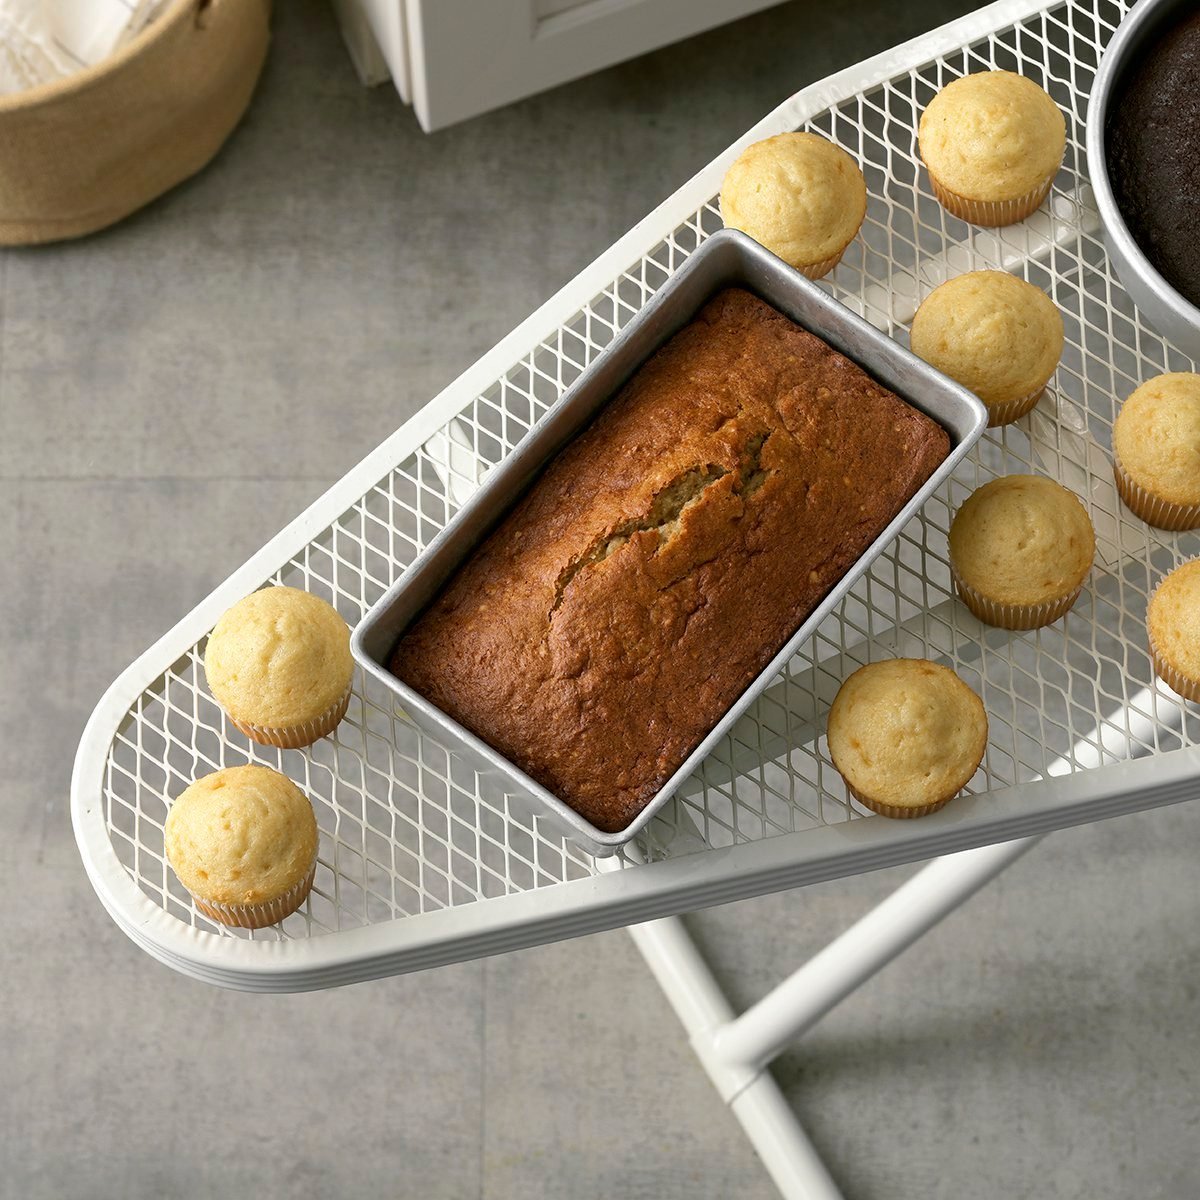 CAKE ON THE BRAIN: LE CREUSET COOK N BAKE SILICONE MUFFIN CUPS